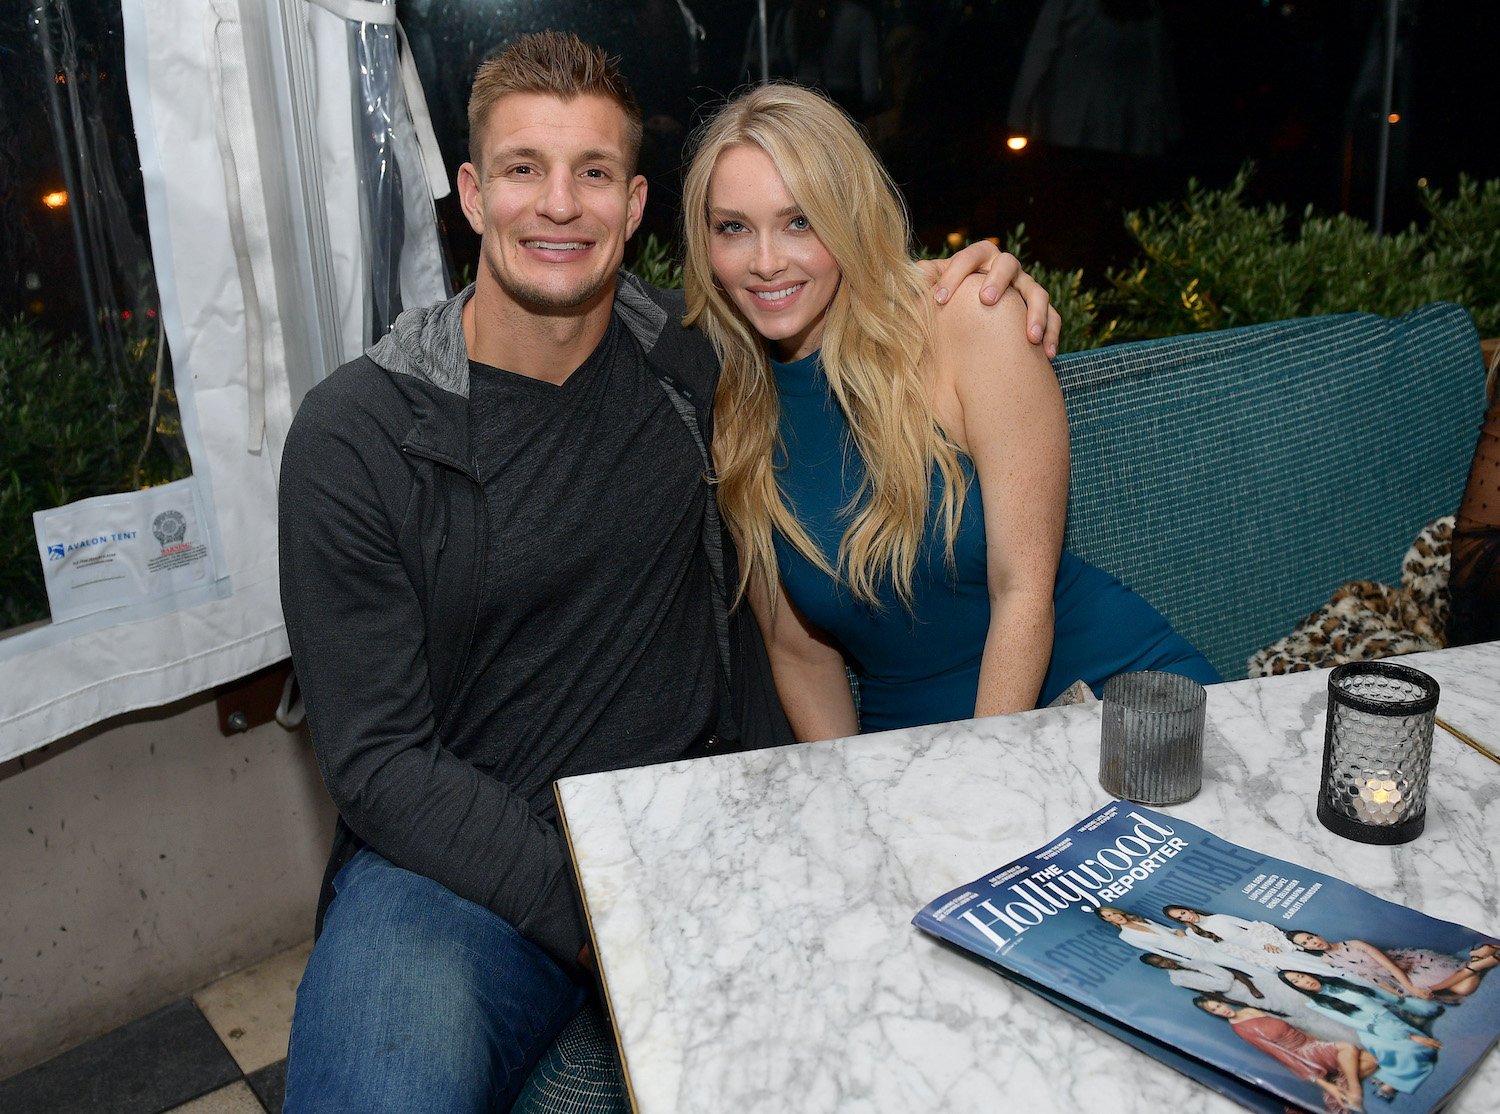 Rob Gronkowski and Camille Kostek attend the Hollywood Foreign Press Association and The Hollywood Reporter Celebration of the 2020 Golden Globe Awards Season